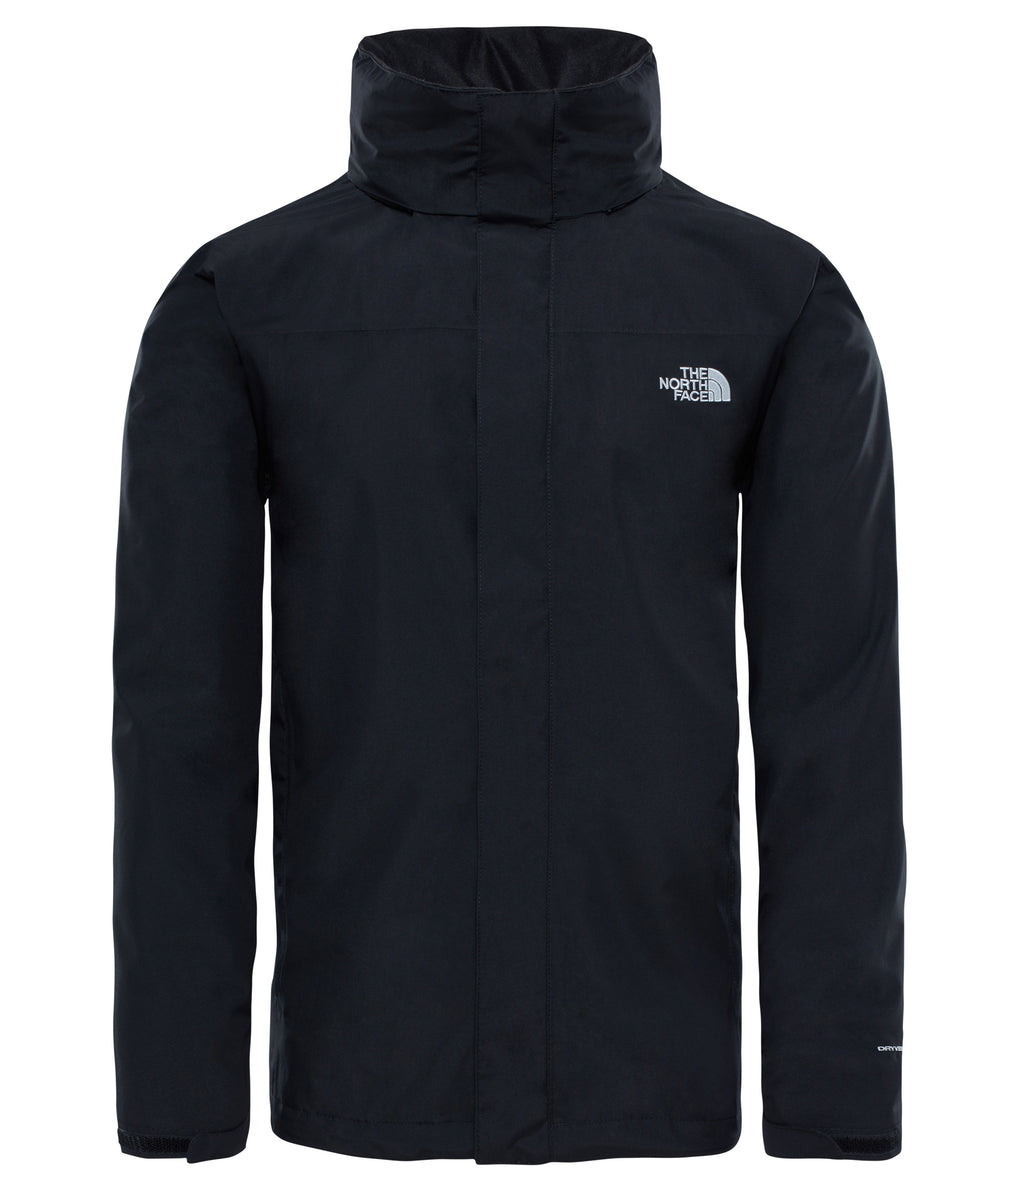 The North Face Men's Sangro promotional Jacket